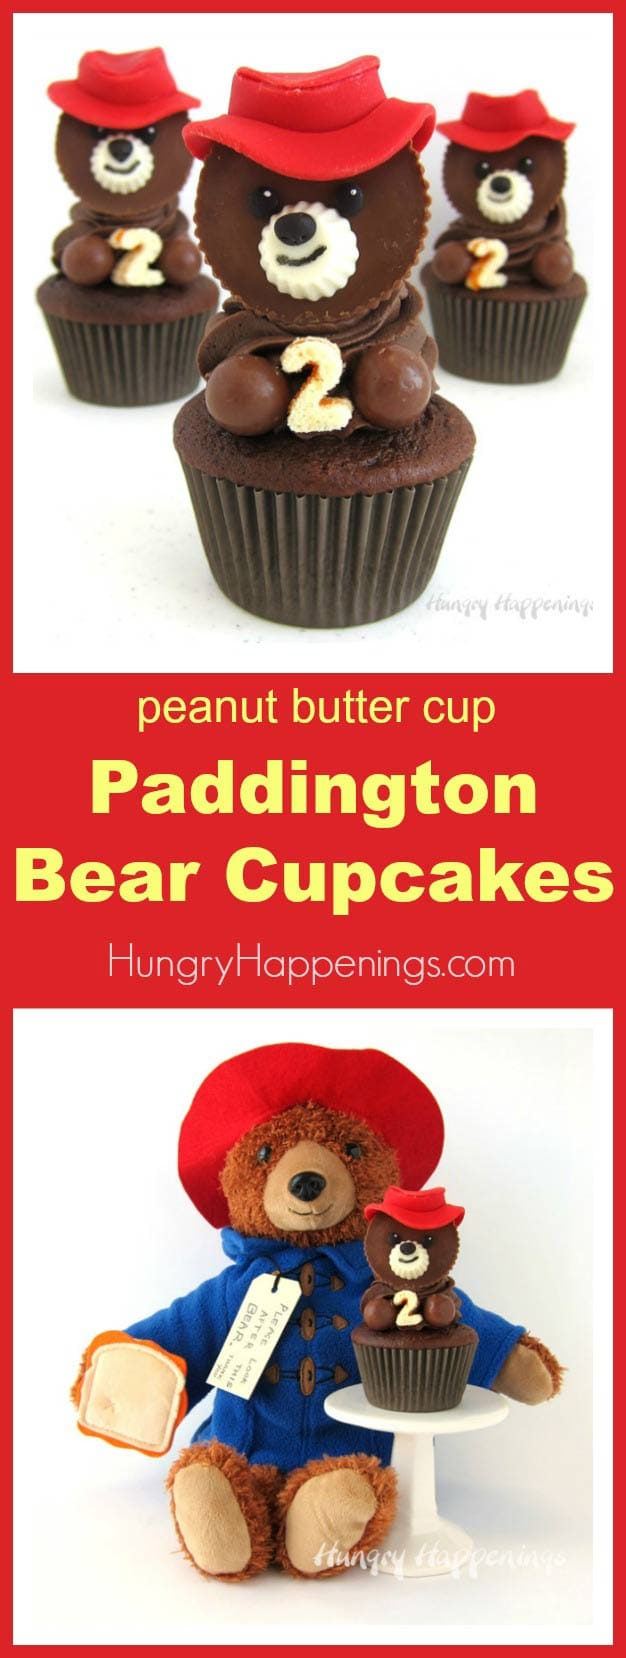 Kids of all ages will fall in love with these Paddington Bear Cupcakes. Each chocolate cupcake, made to celebrate the release of Paddington 2, is topped with a swirl of chocolate frosting and is adorned with a peanut butter cup bear wearing a bright red candy hat. #Paddington2 #ad